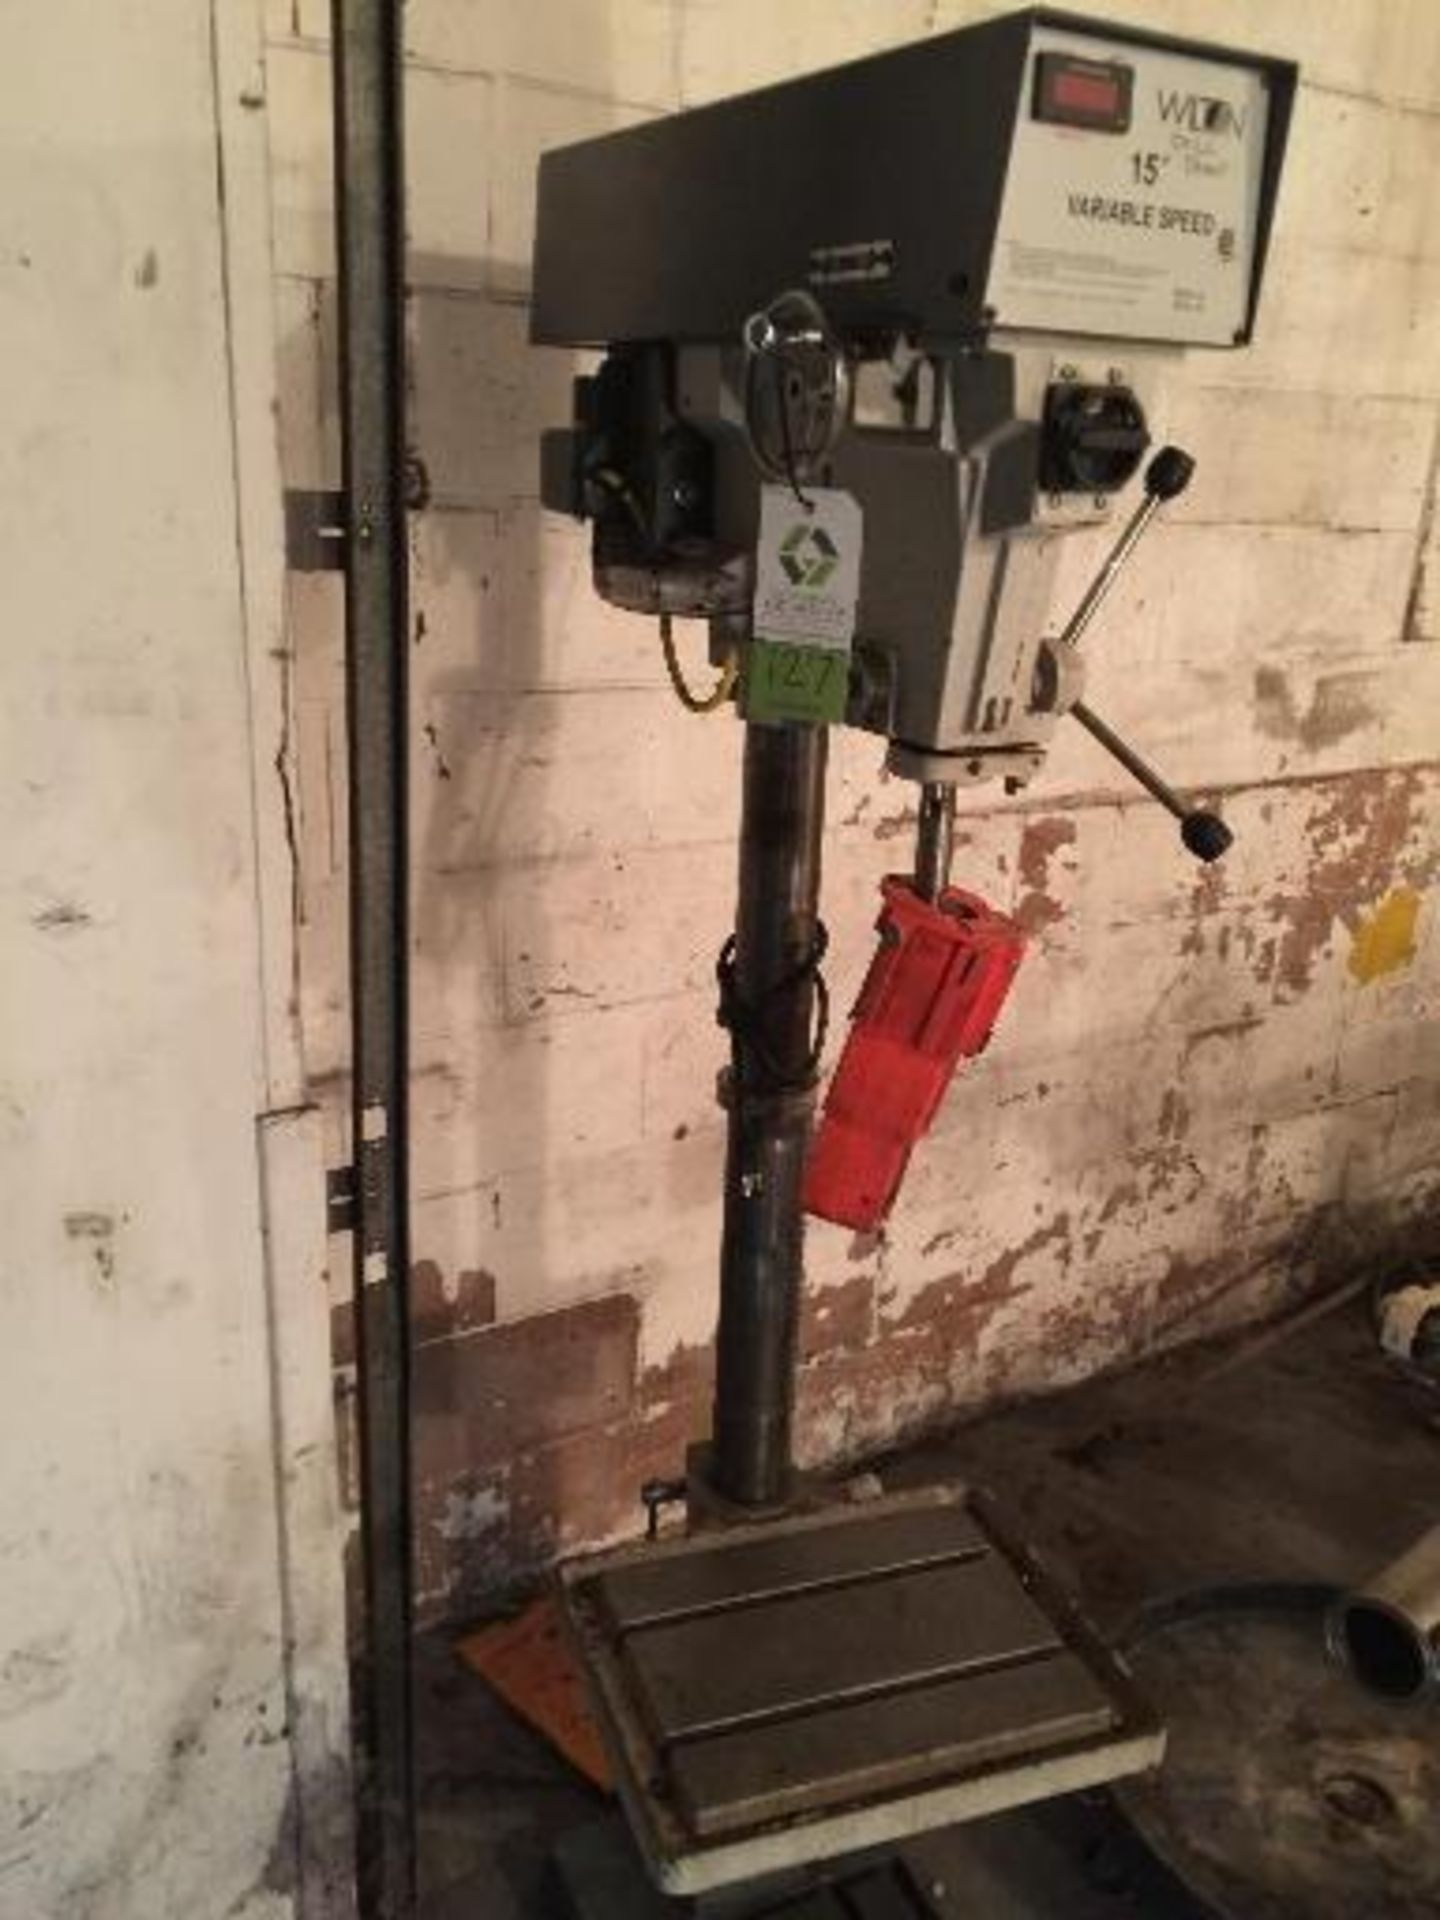 Wilton 15 in. variable speed drill press, T-Slot talbe, floor model (ET-21788 ) This item located in